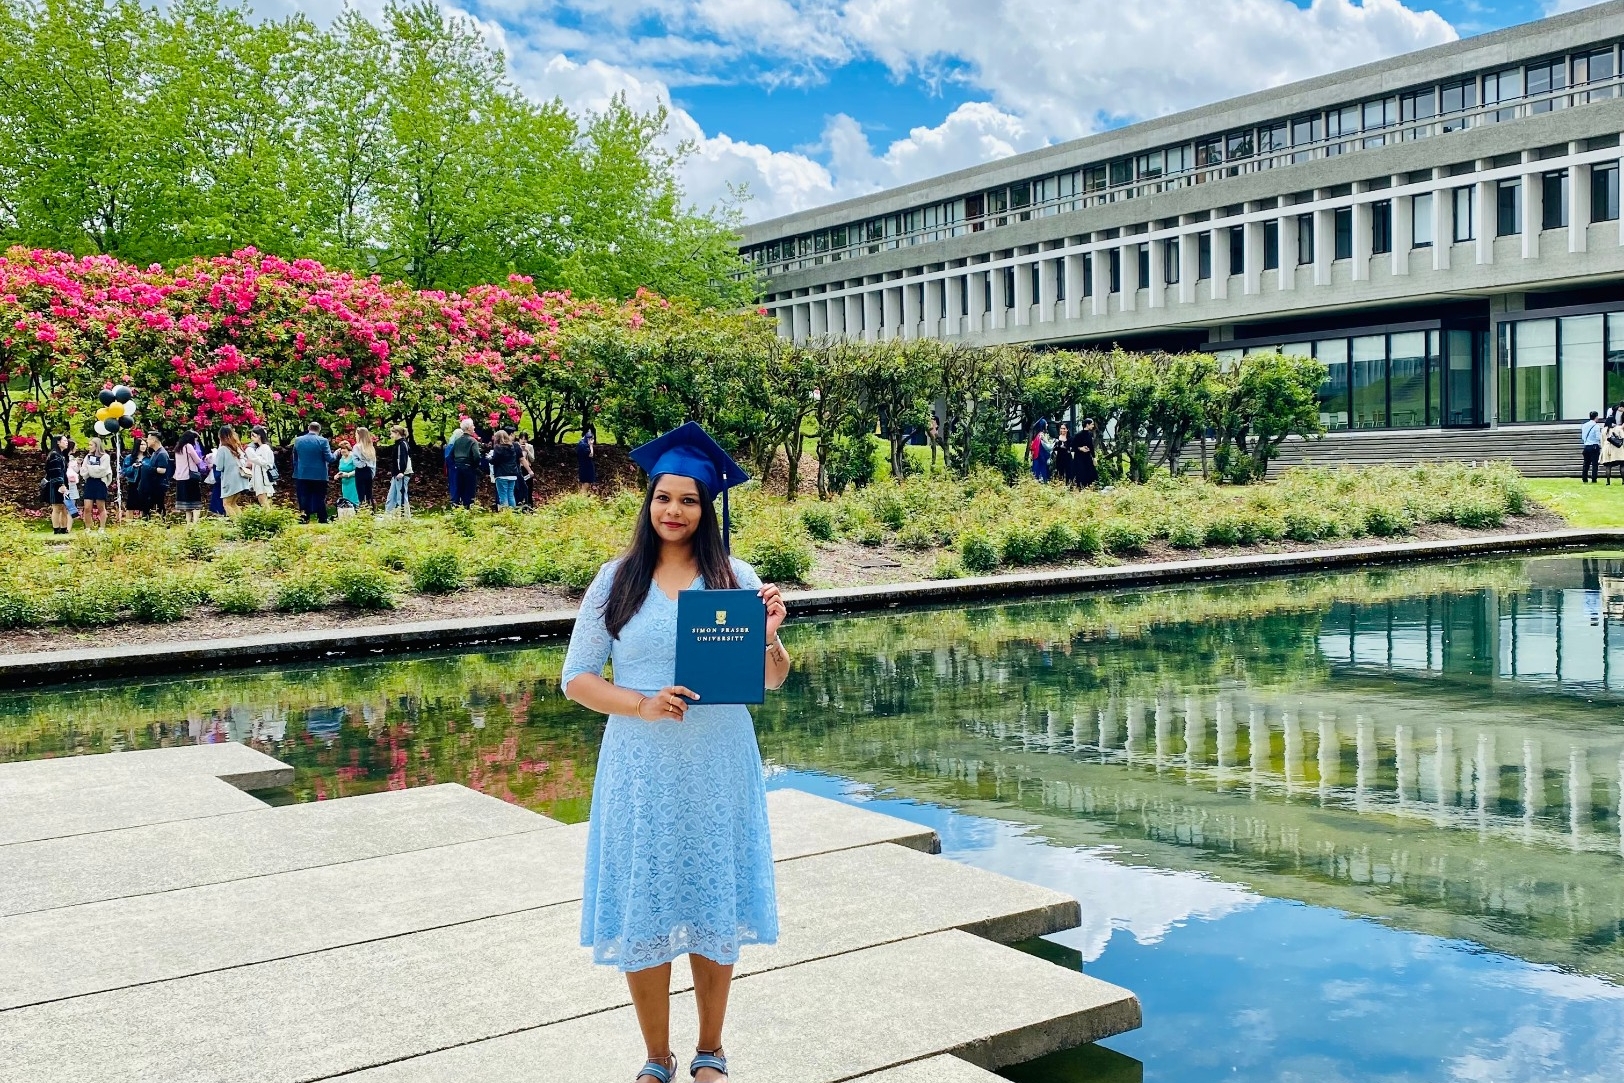 MPub alumnus Christina Paul with her Masters degree in front of the AQ pond at SFU's Burnaby campus. She is donning a bright floral dress and her graduation cap.